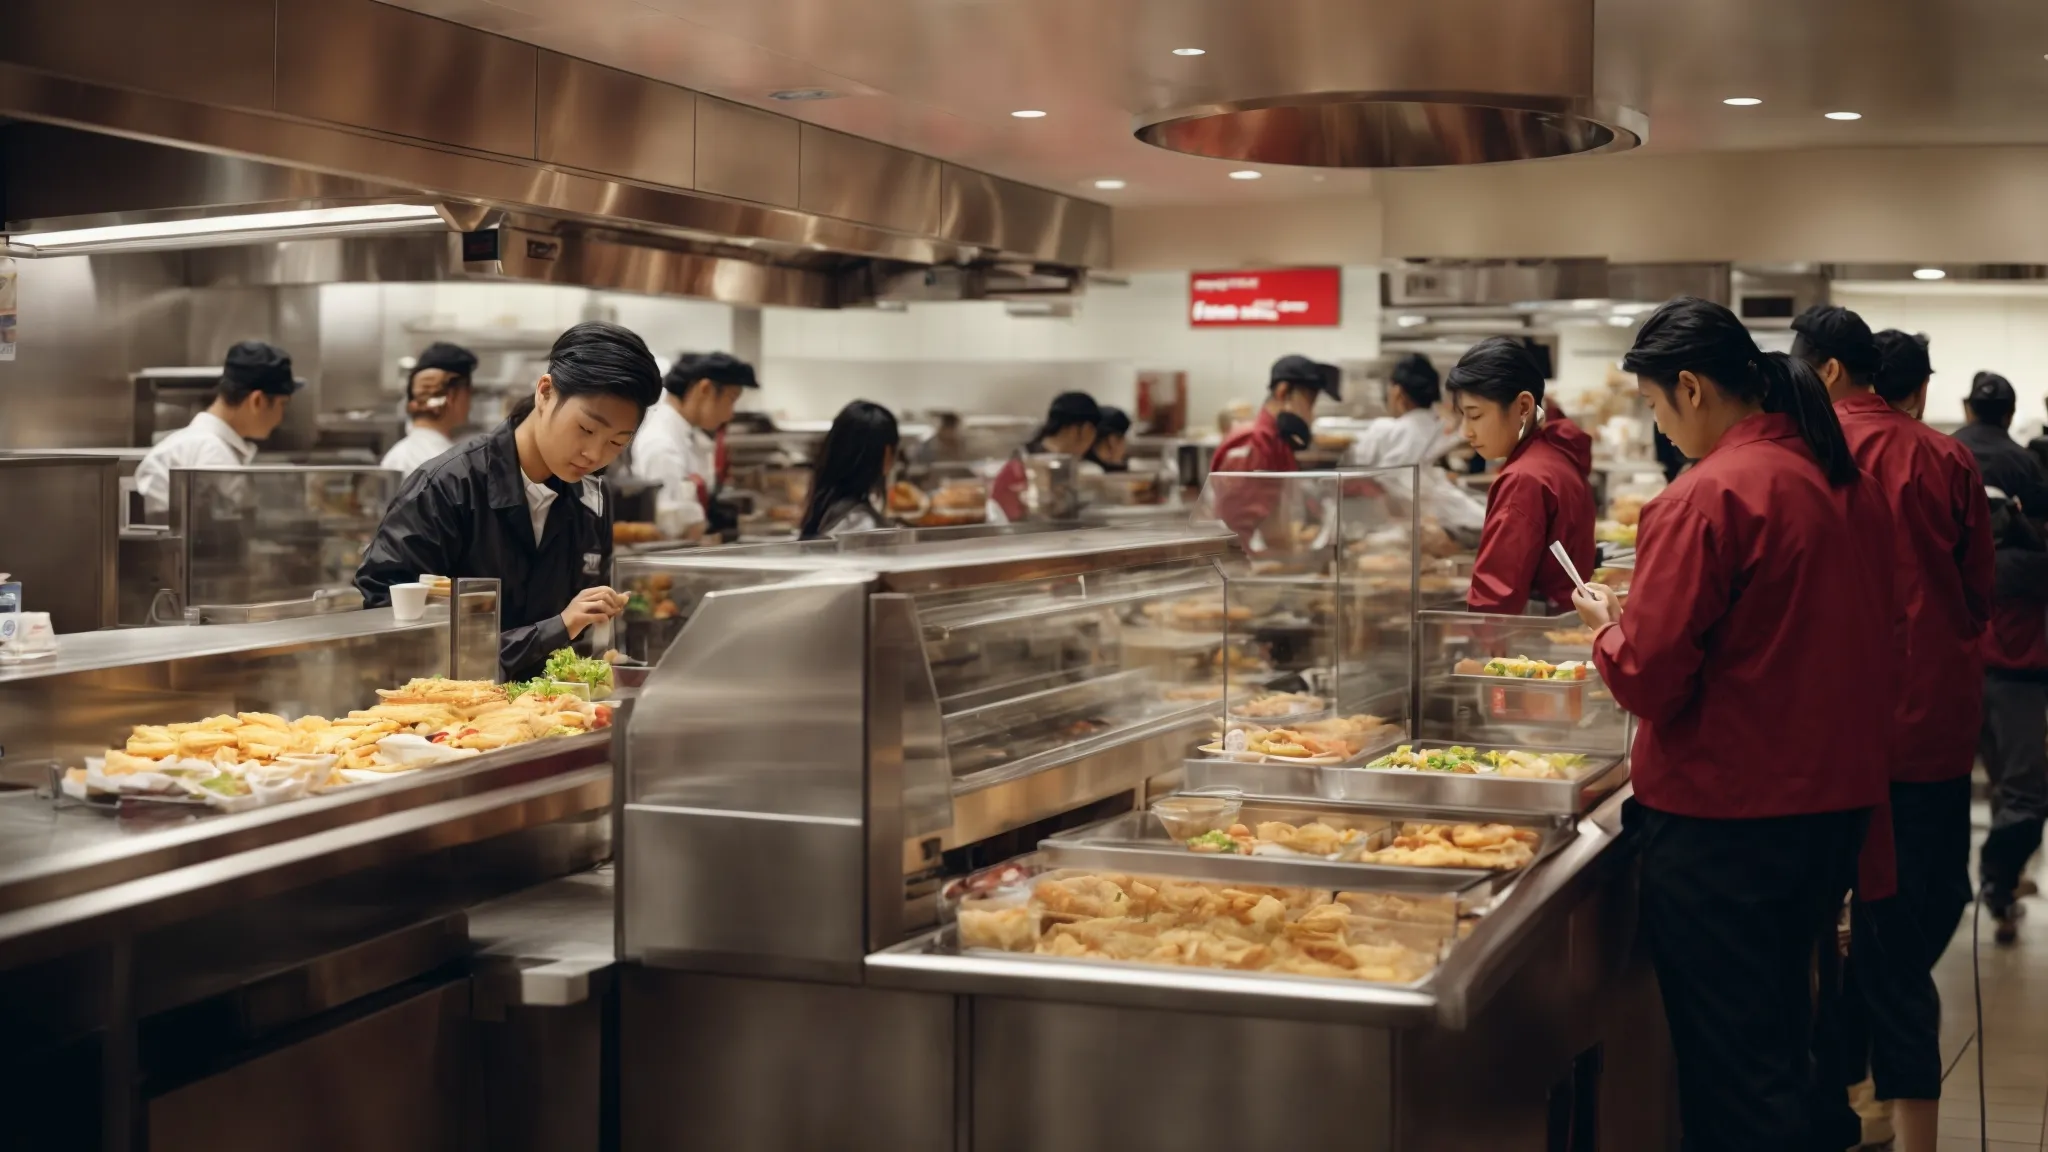 a bustling mcdonald's restaurant with customers engaging in mobile ordering while staff prepare food in the kitchen area visible in the background.